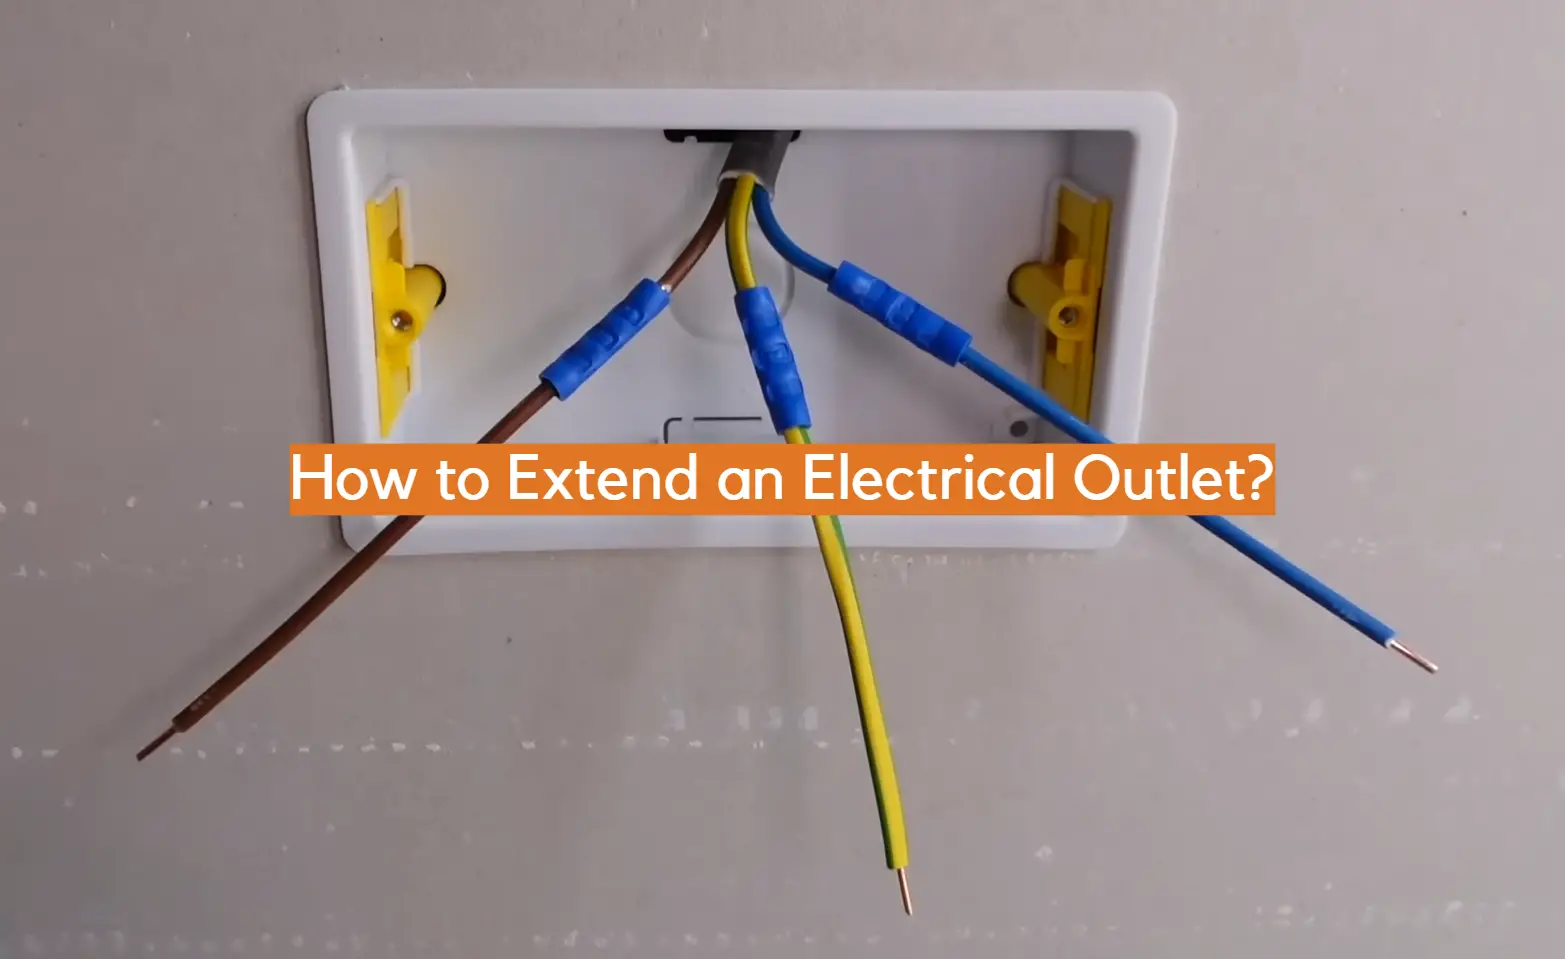 How to Extend an Electrical Outlet?